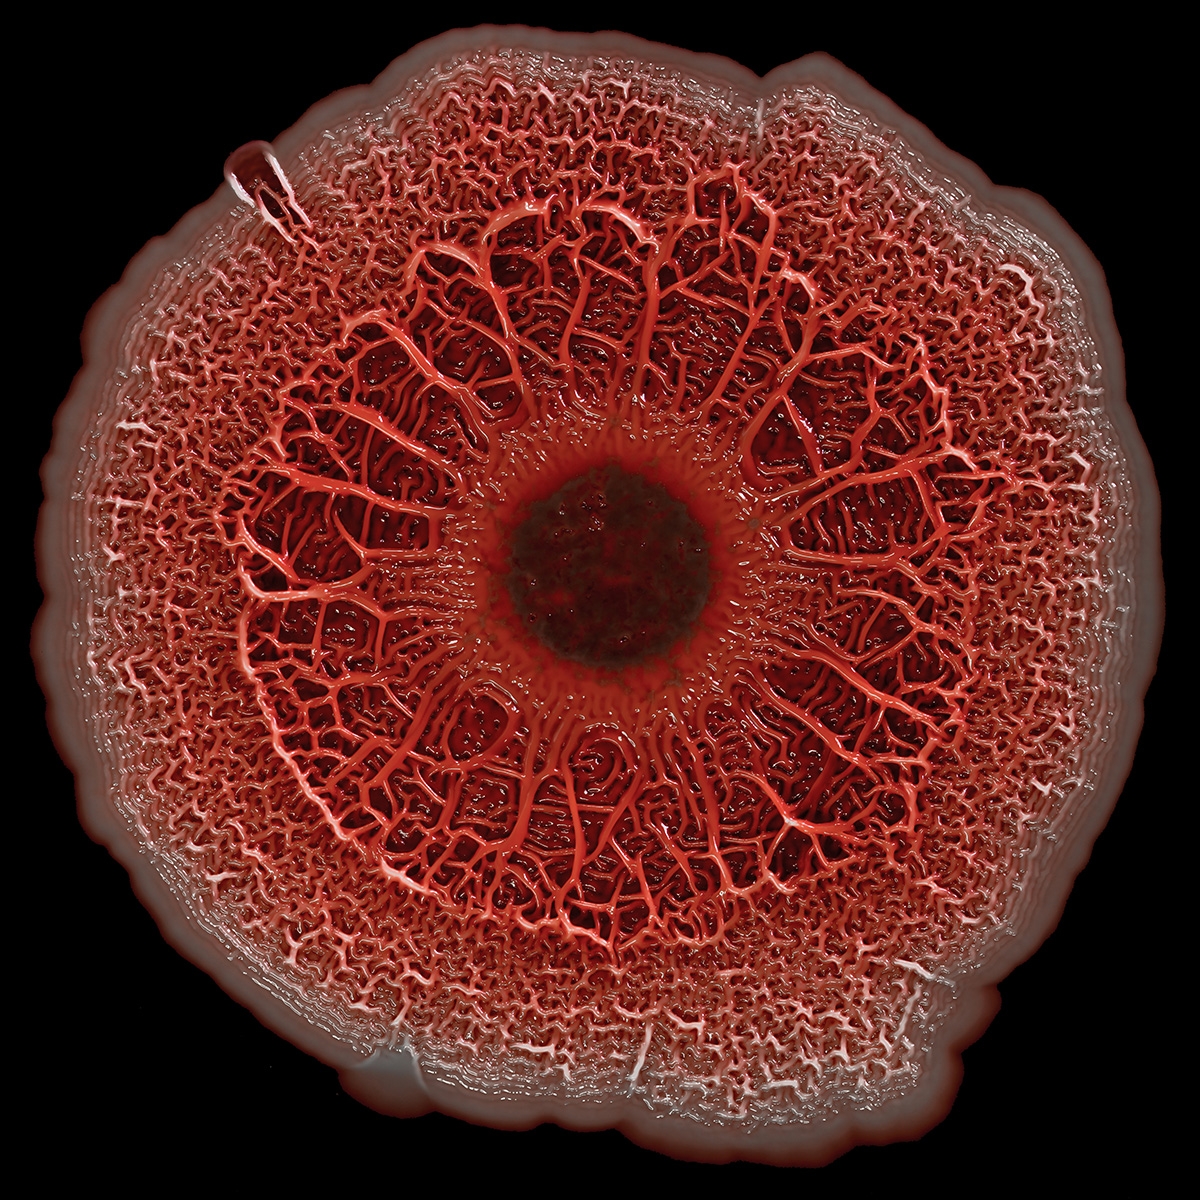 Ultra-high resolution composite image of a bacterial colony biofilm. Photo credit: Scott Chimileski